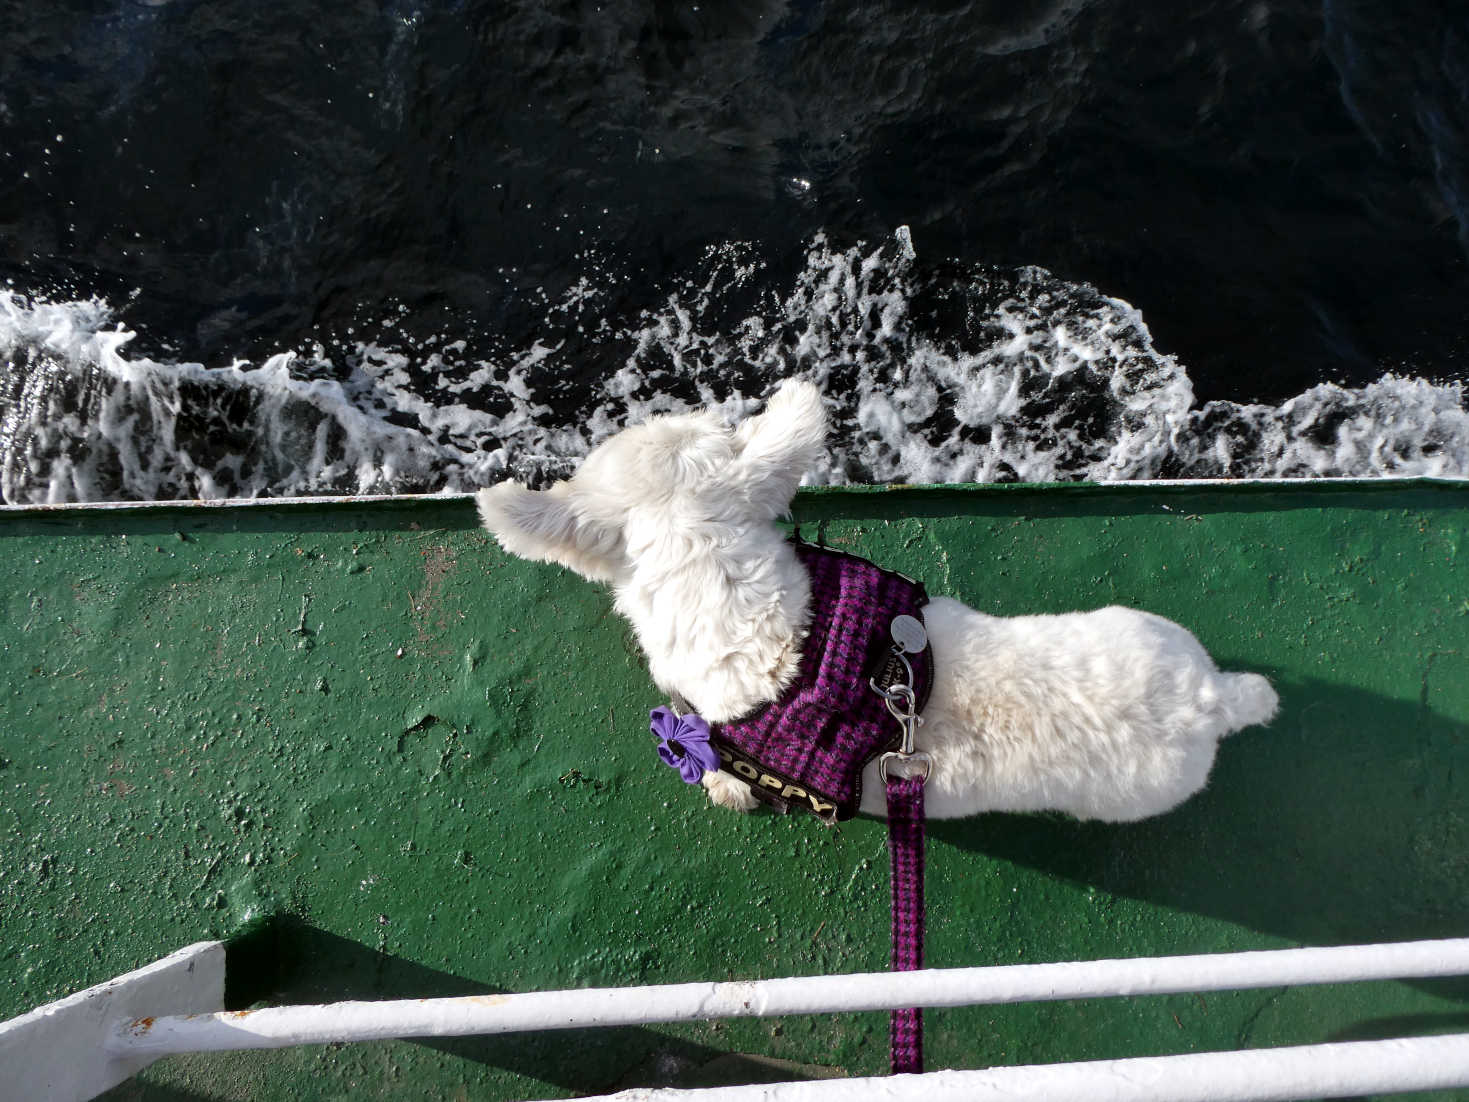 poppy the westie is glad she is not swimming back